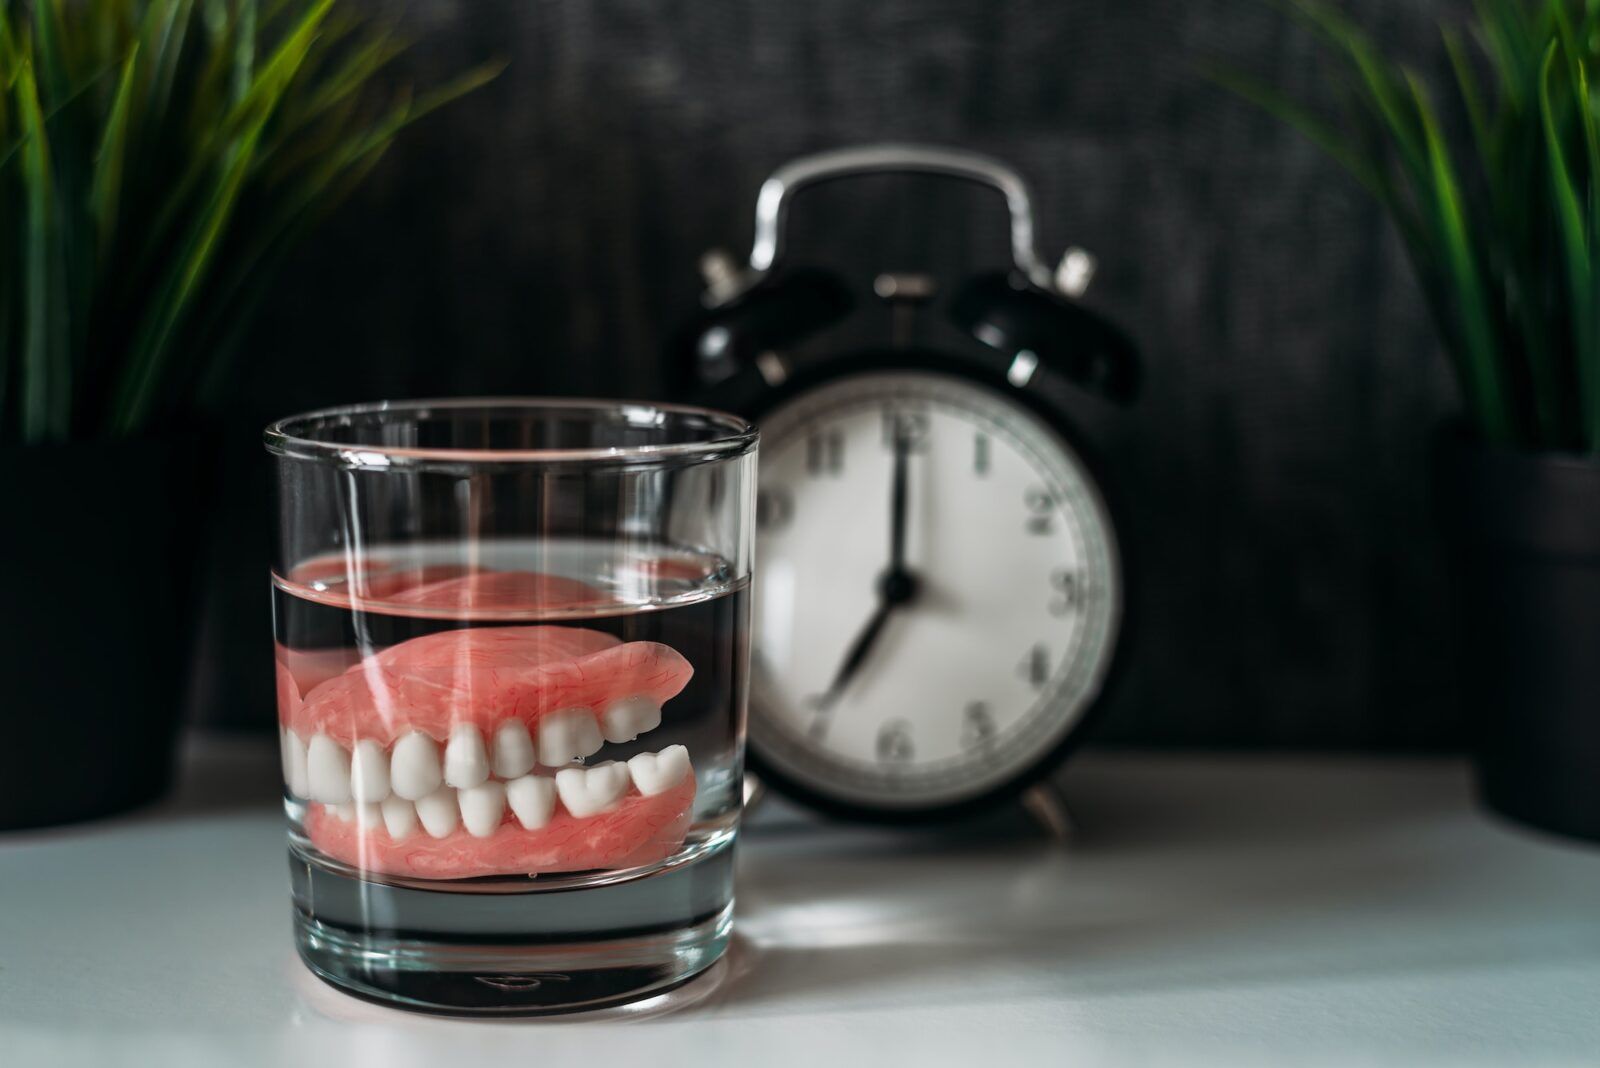 An acrylic denture in a glass of water and a clock in the background. Dentures or false teeth